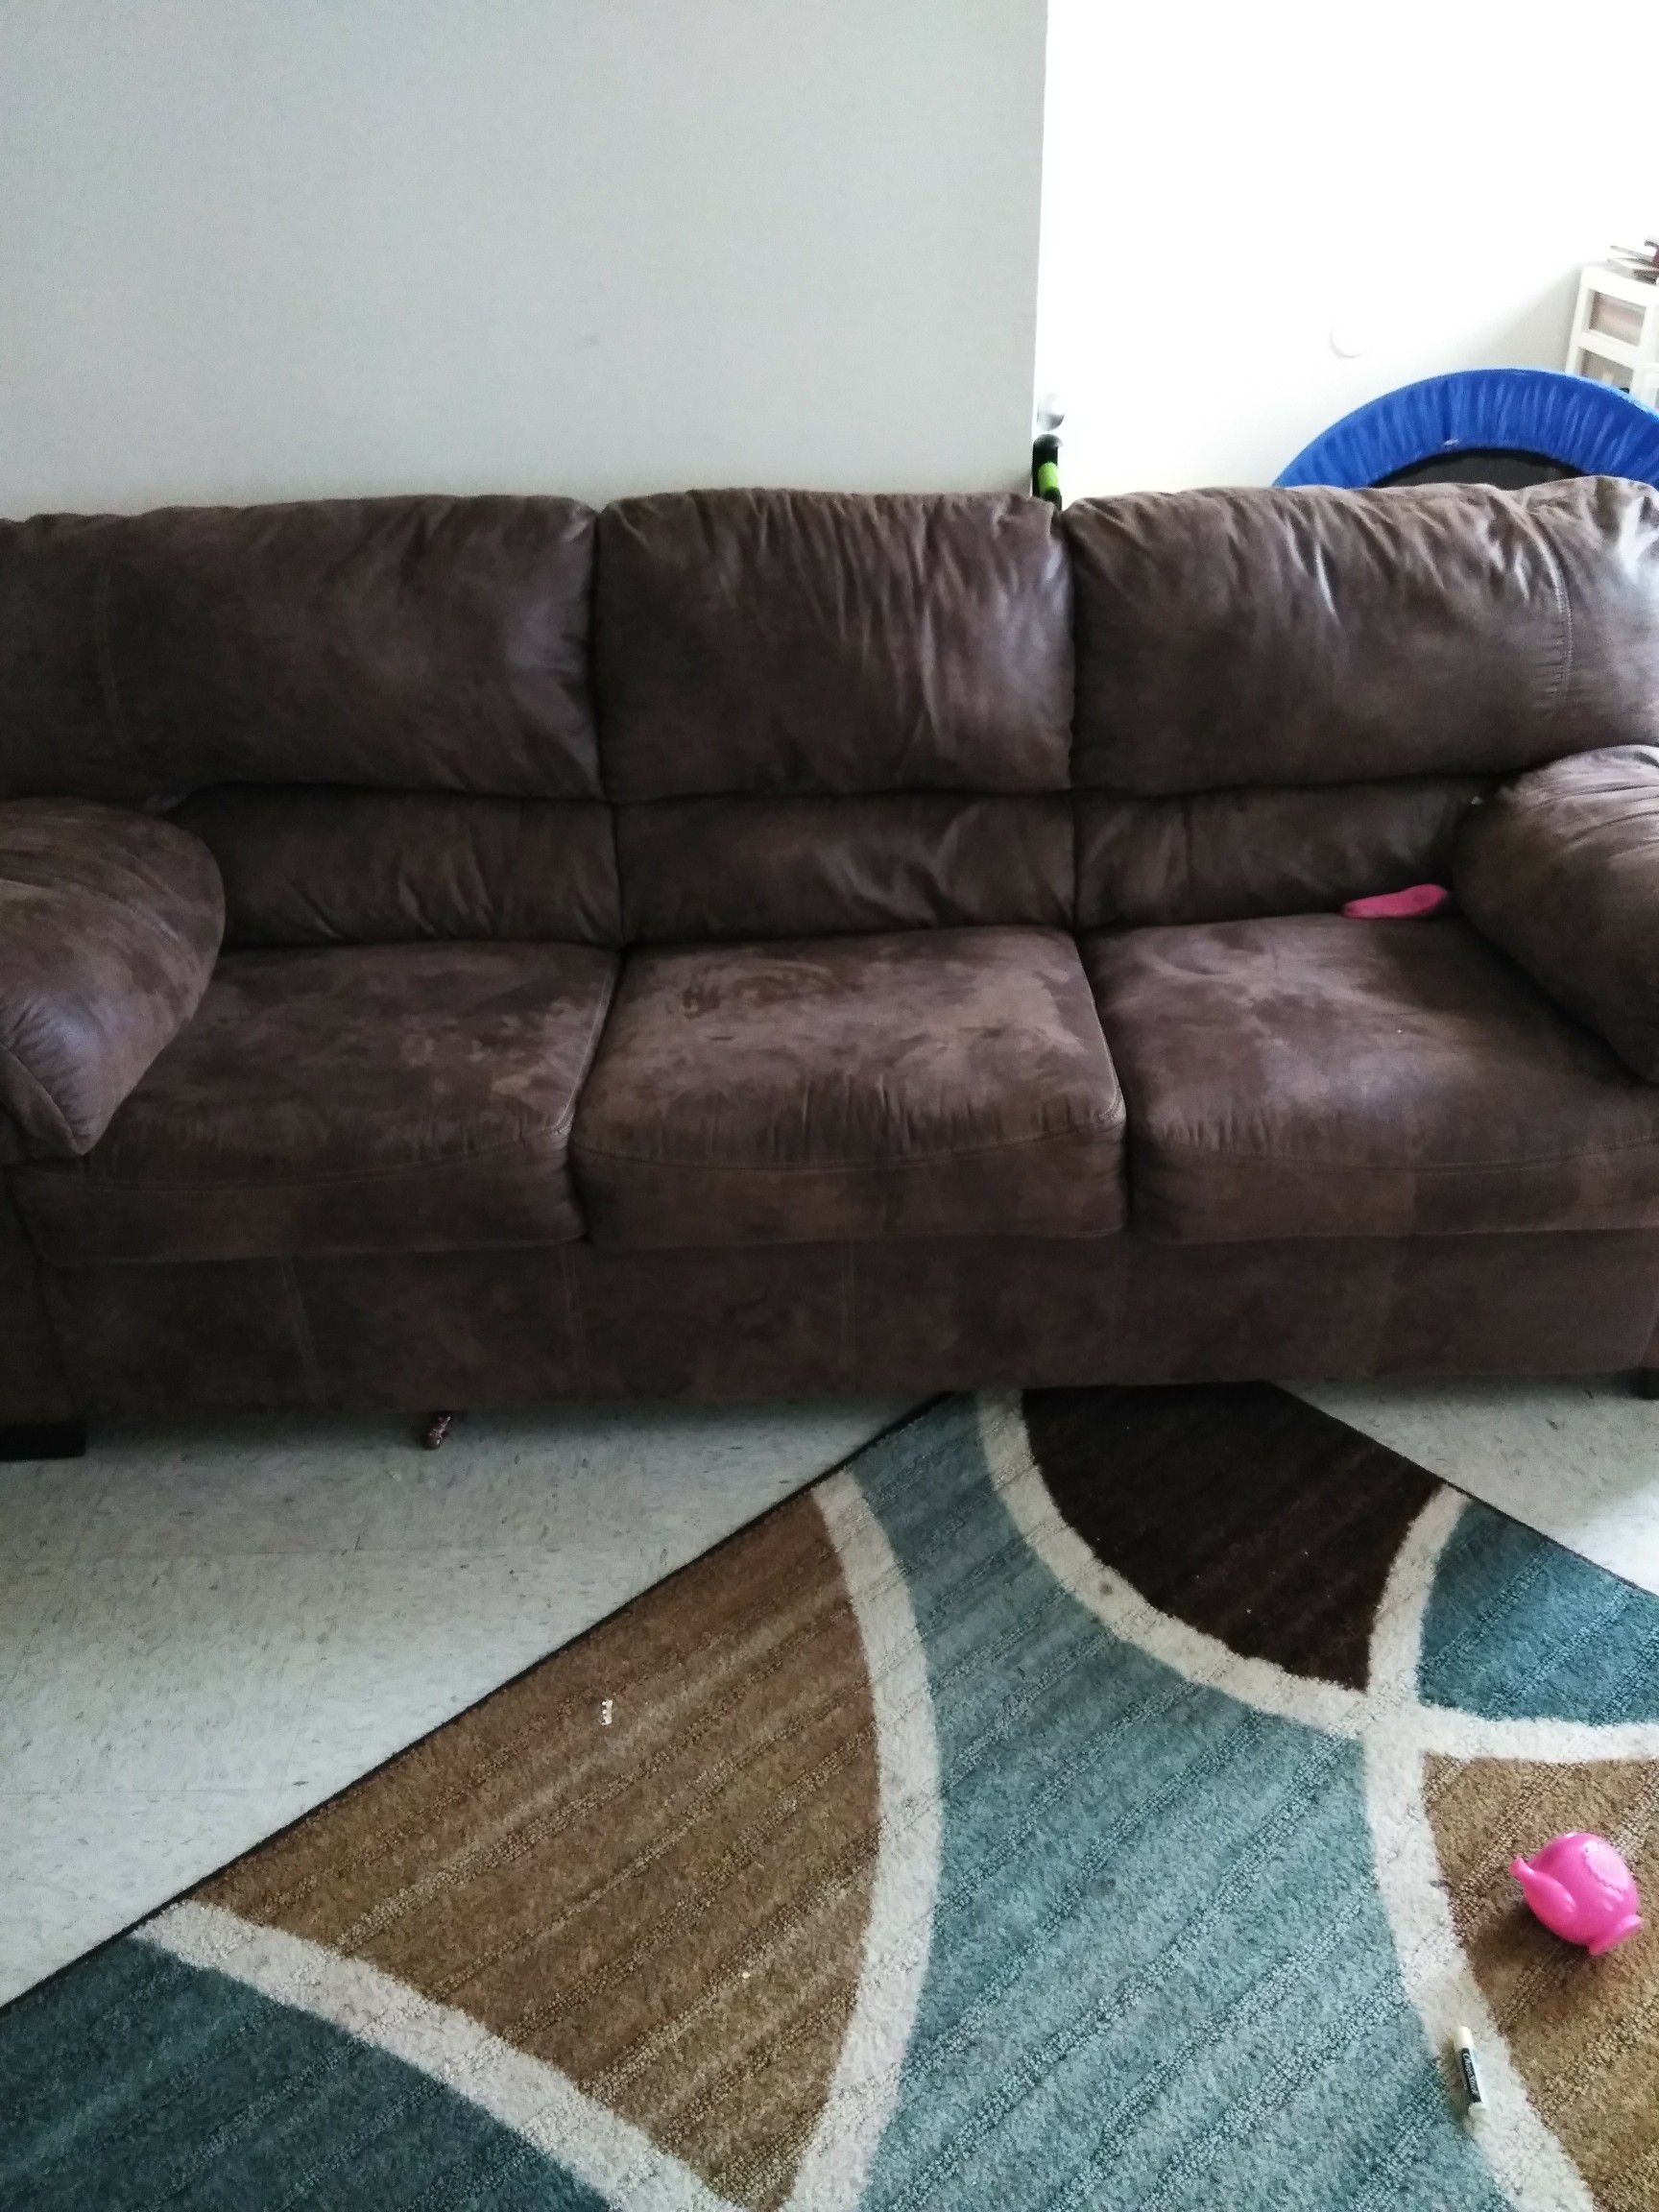 New pull out couch set